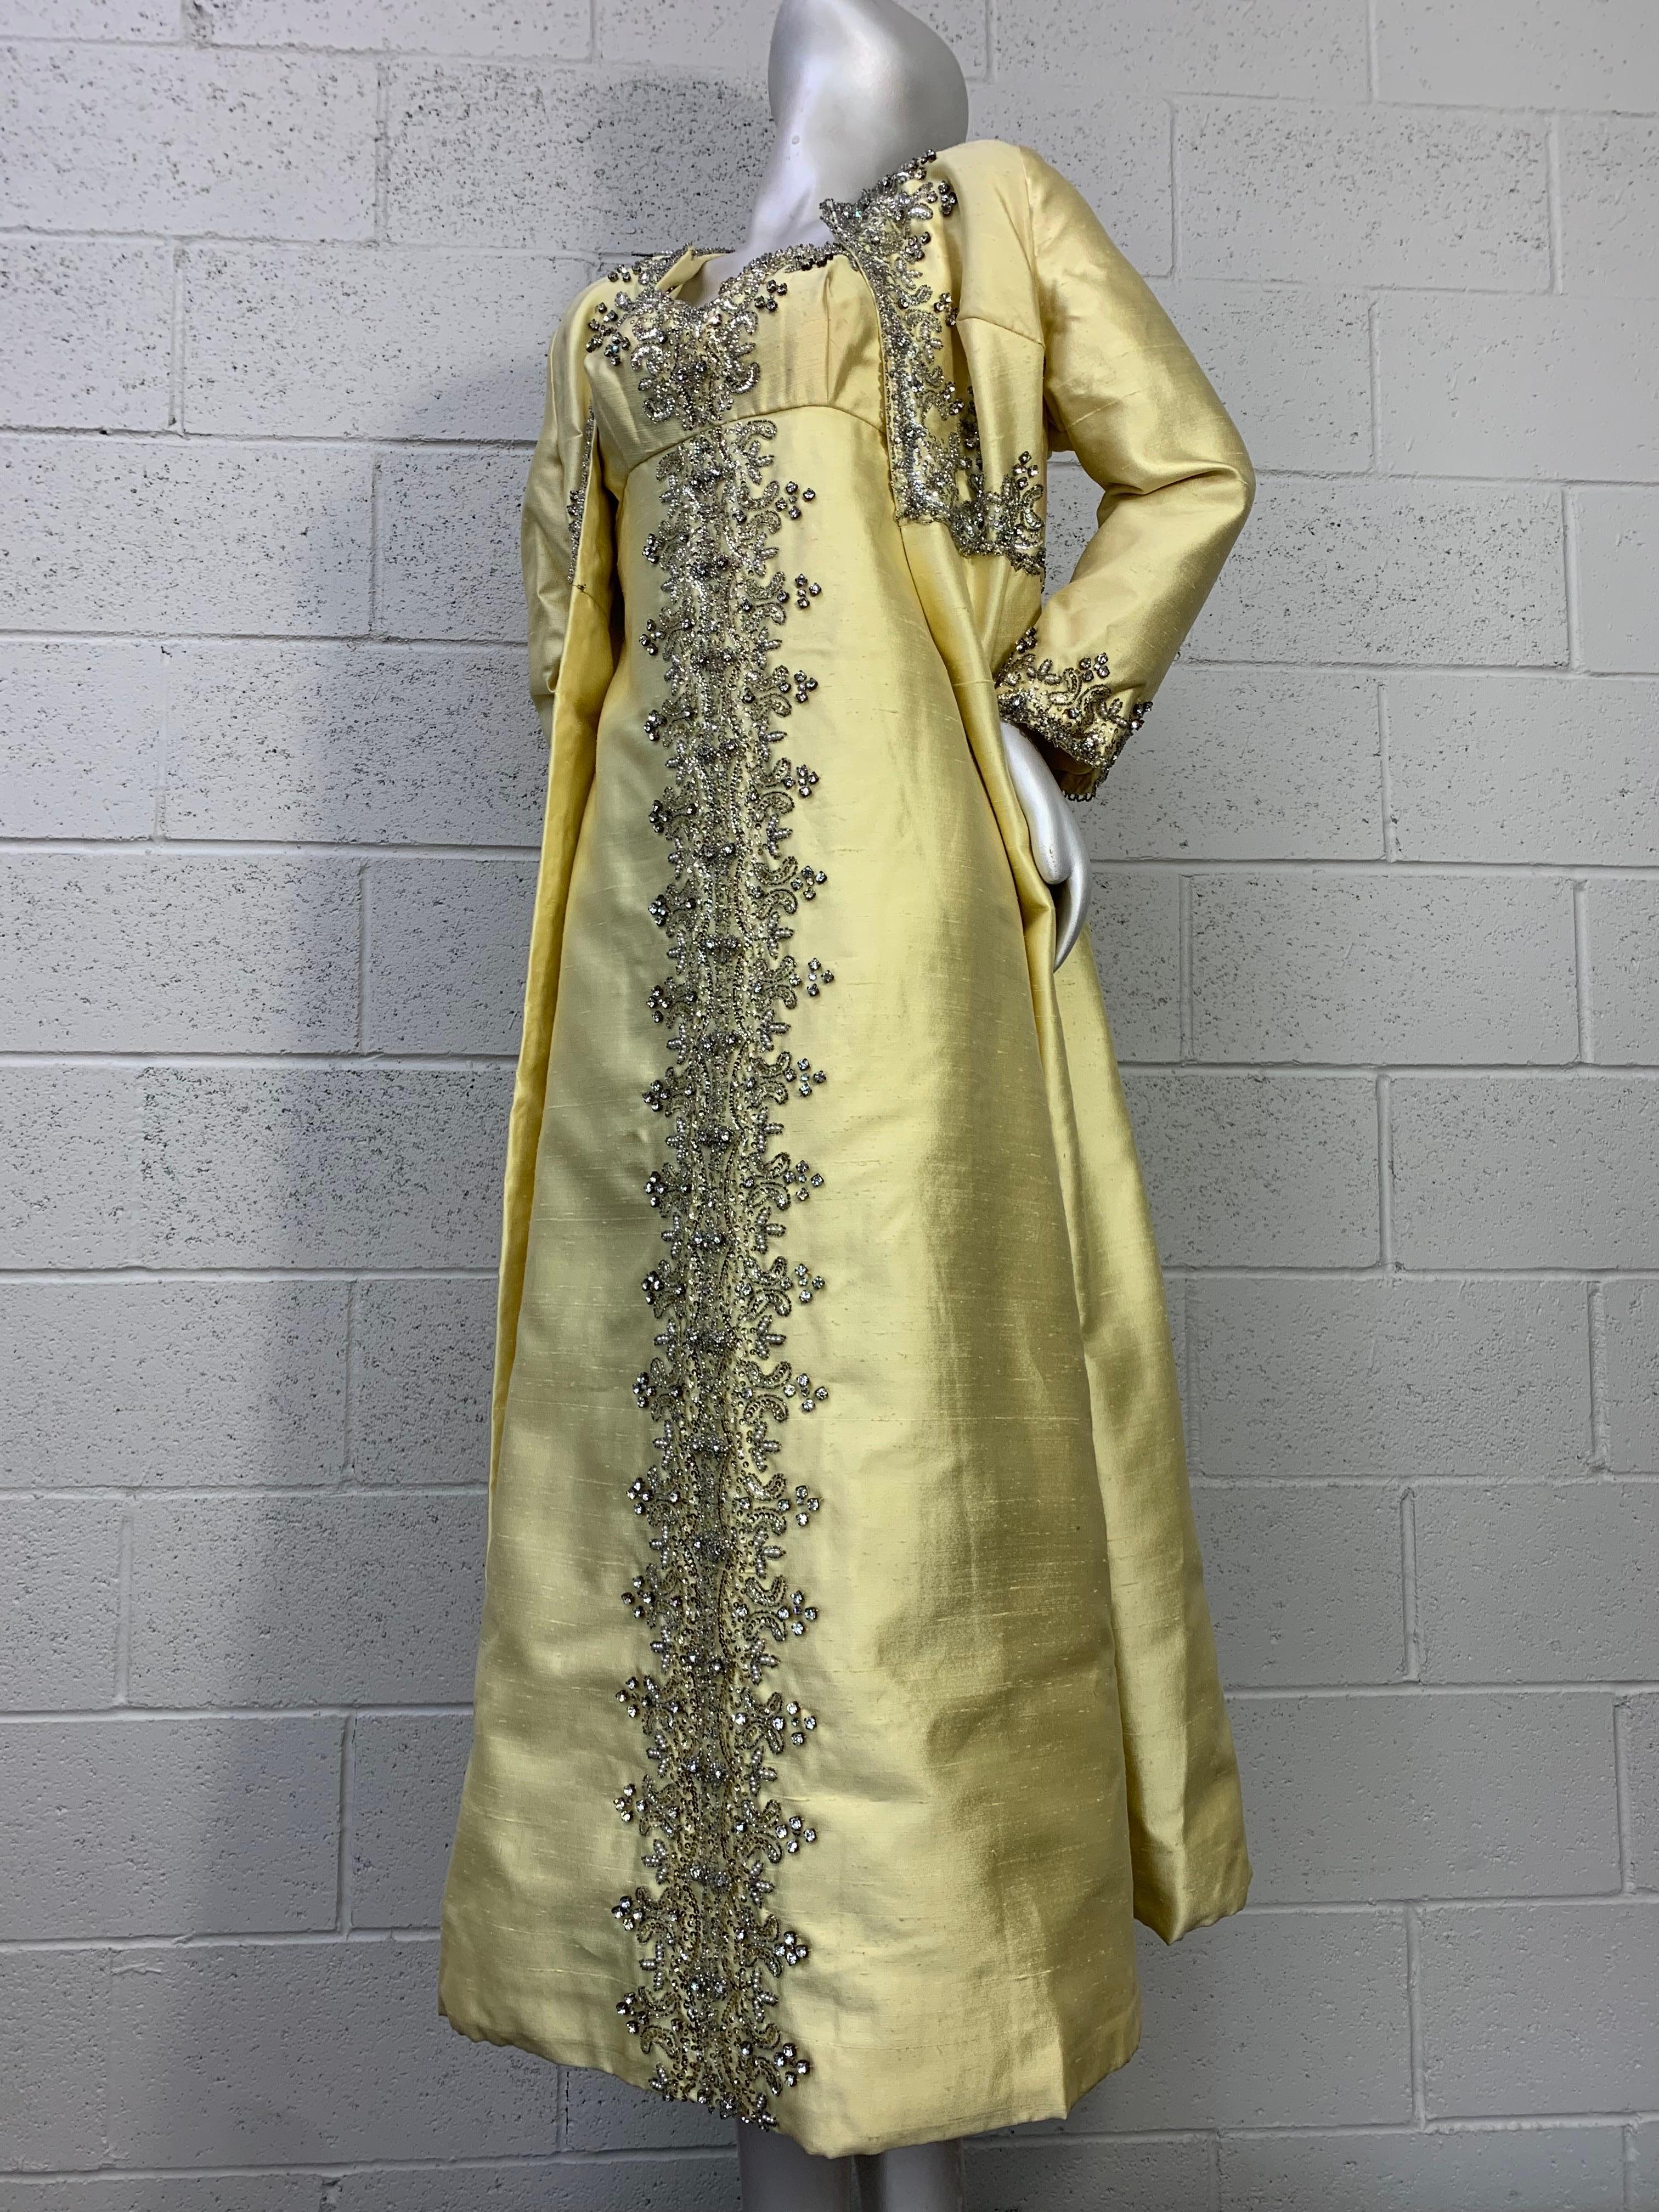 A fabulous Bernetti 1960s 2 piece evening ensemble: Citrine silk opera coat and column dress with extravagant hand-sewn beadwork and rhinestone embroidery throughout. Fully lined. Dress is an Empire style and features Moghul-inspired beadwork down